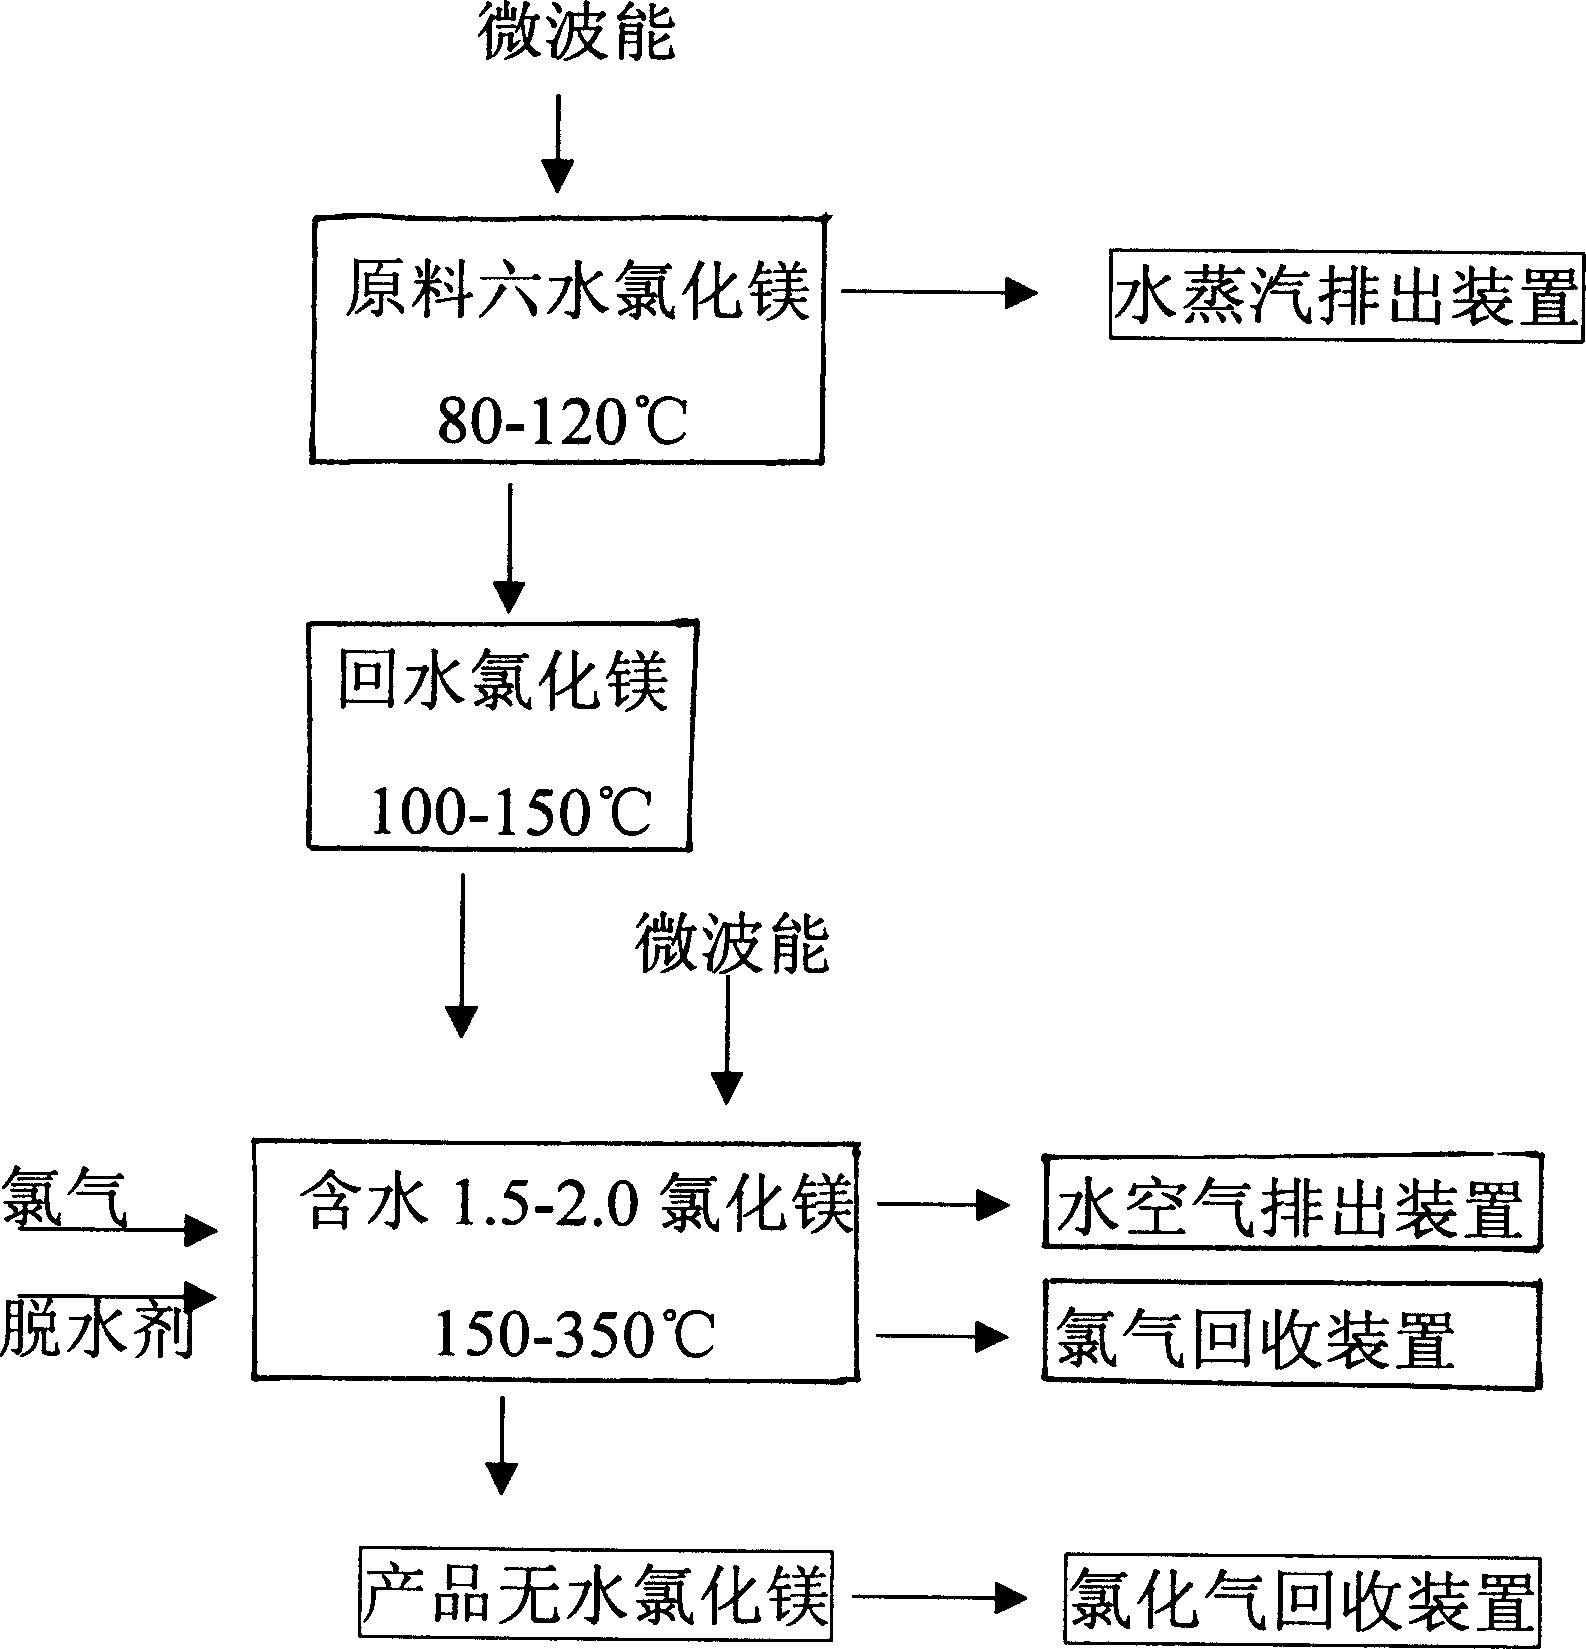 Process for producing anhydrous magnesium chloride by microwave energy